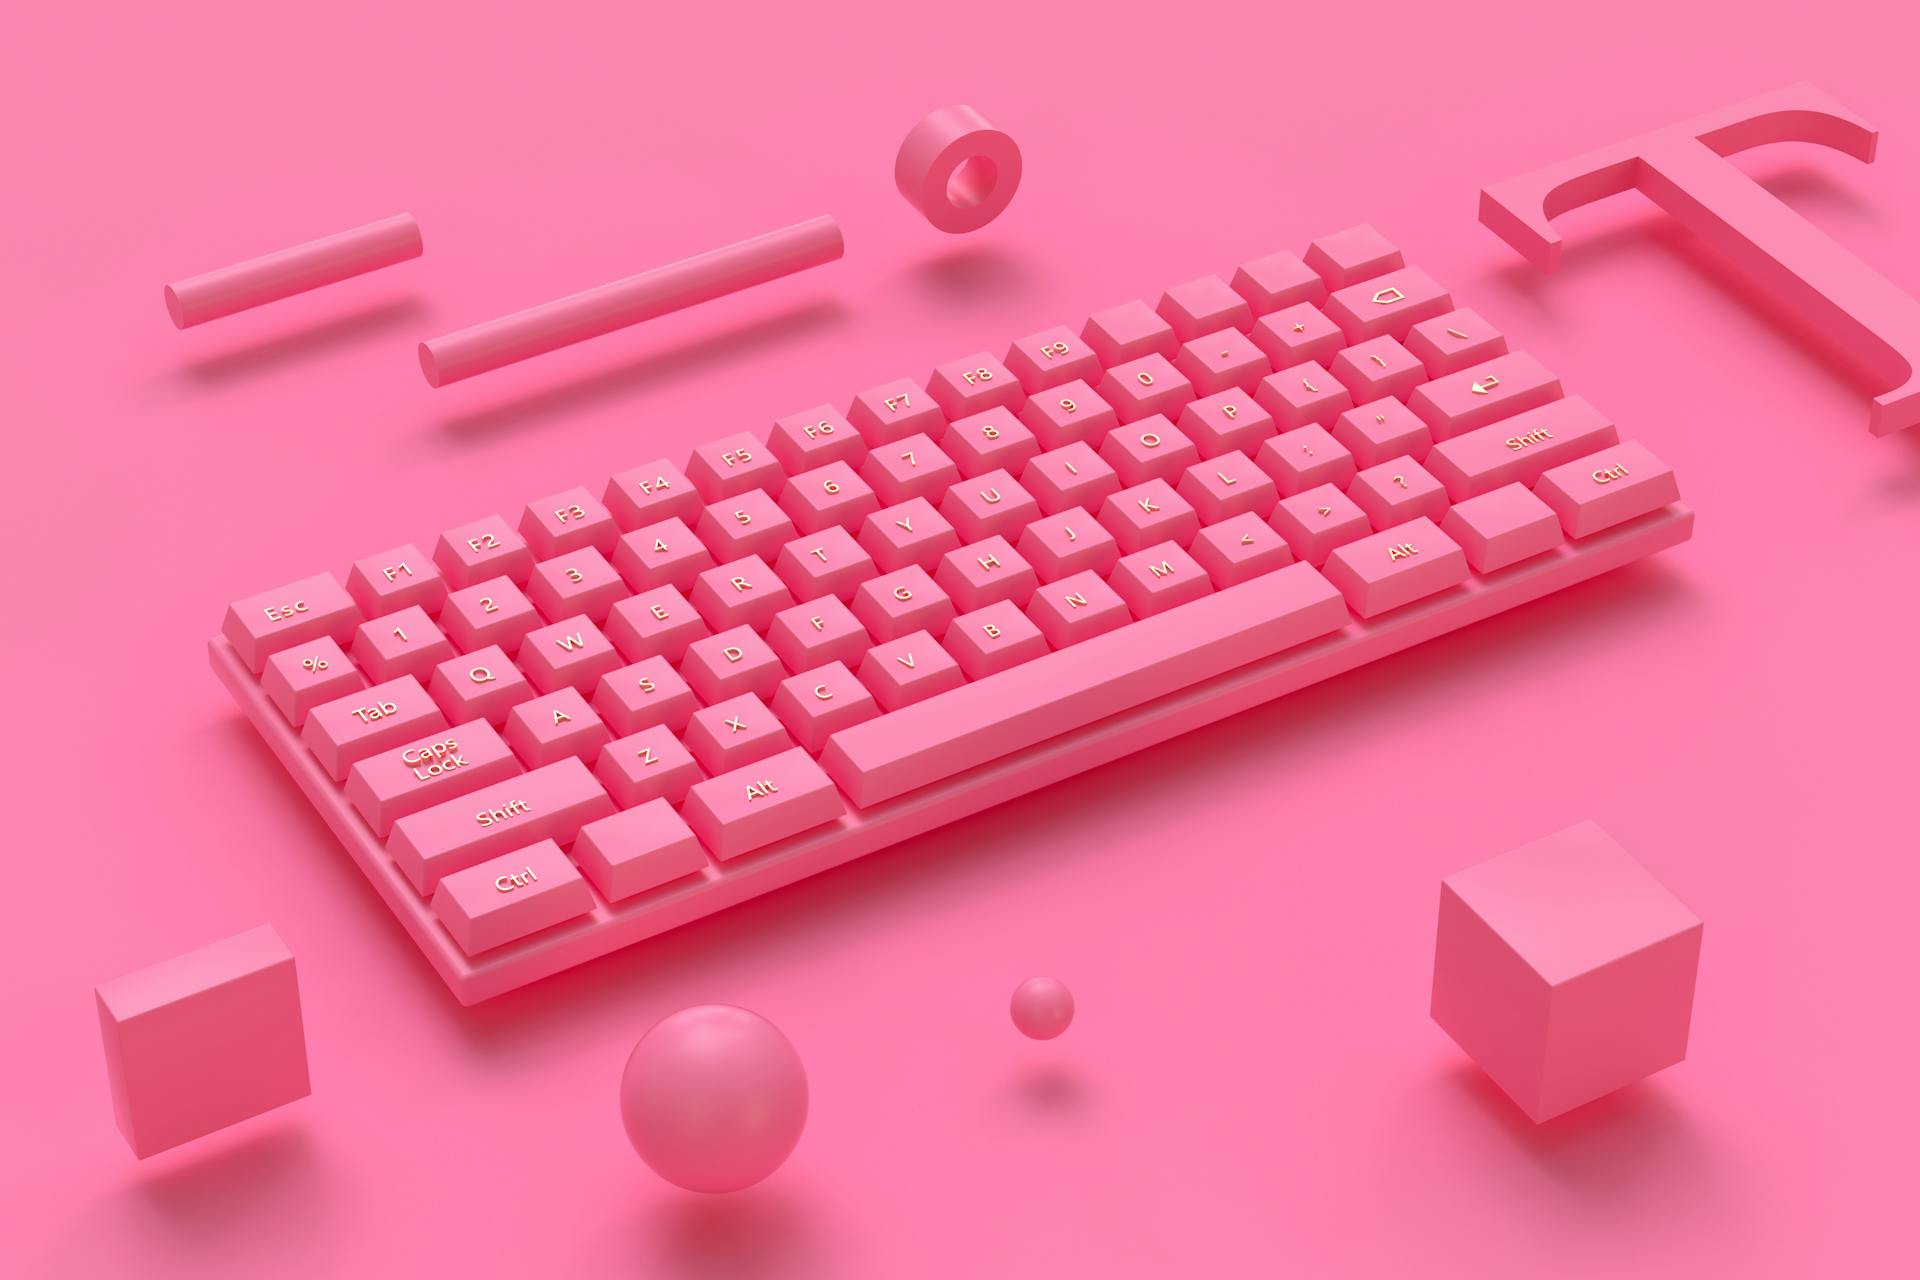 A pink laptop on a bright pink backdrop